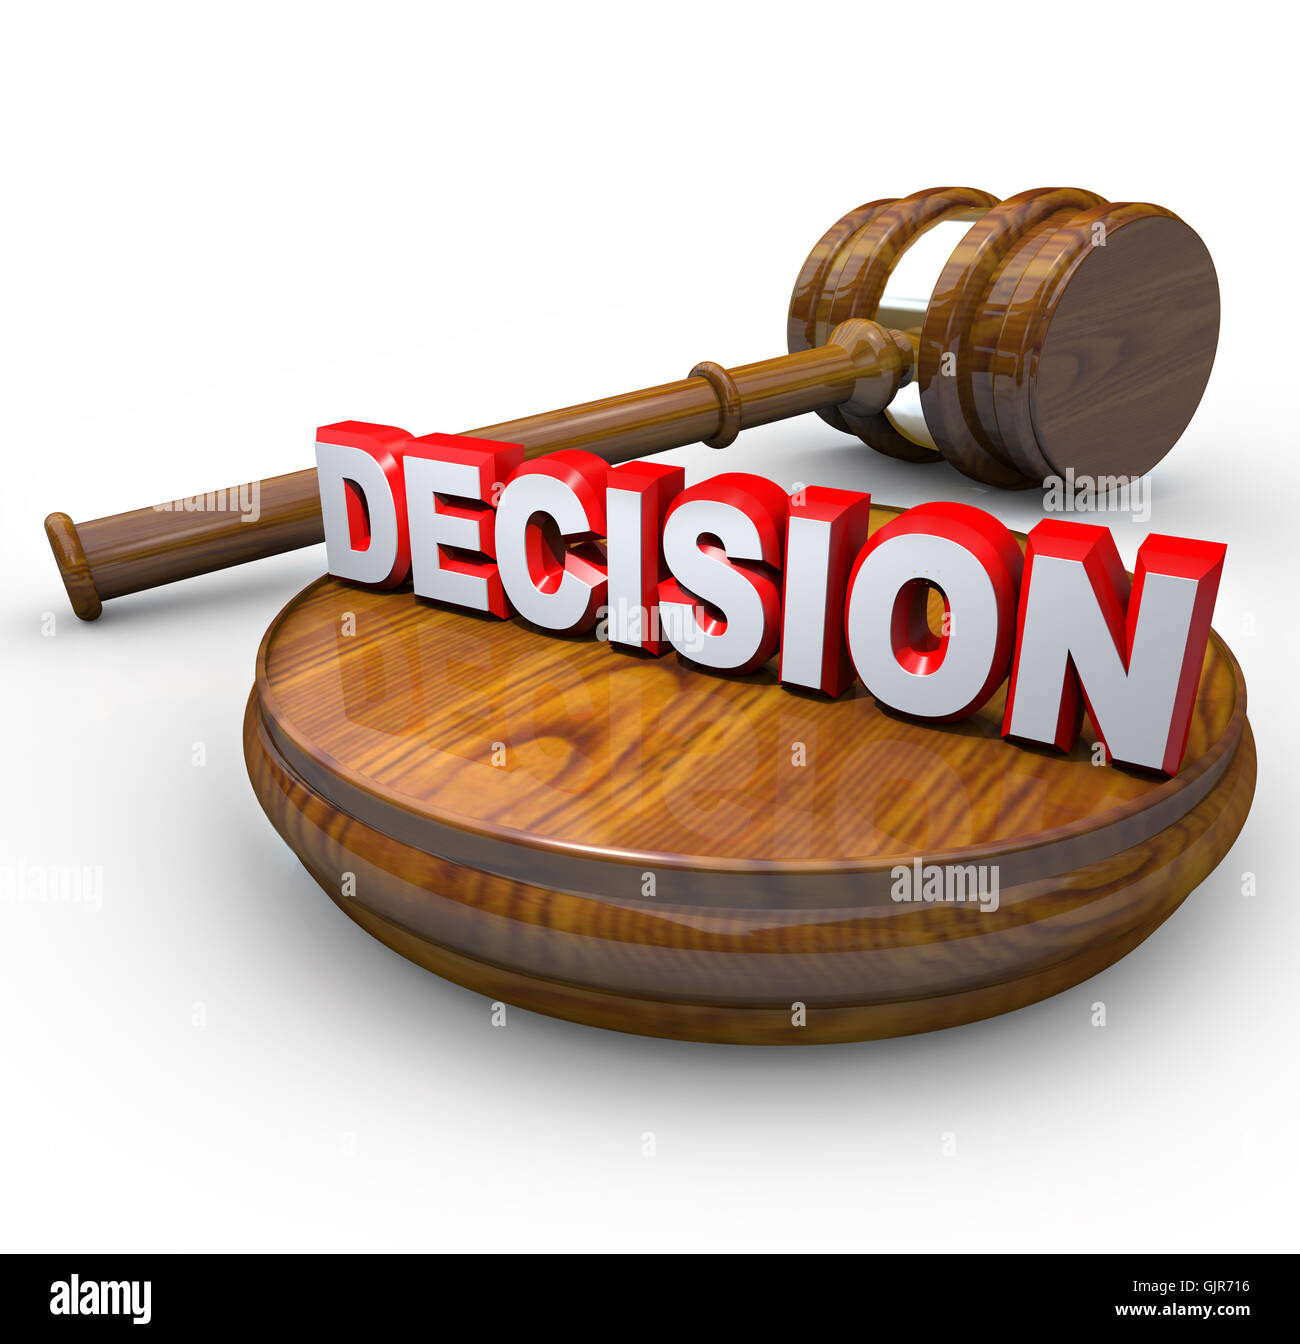 Decision - Judge Gavel and Word Stock Photo